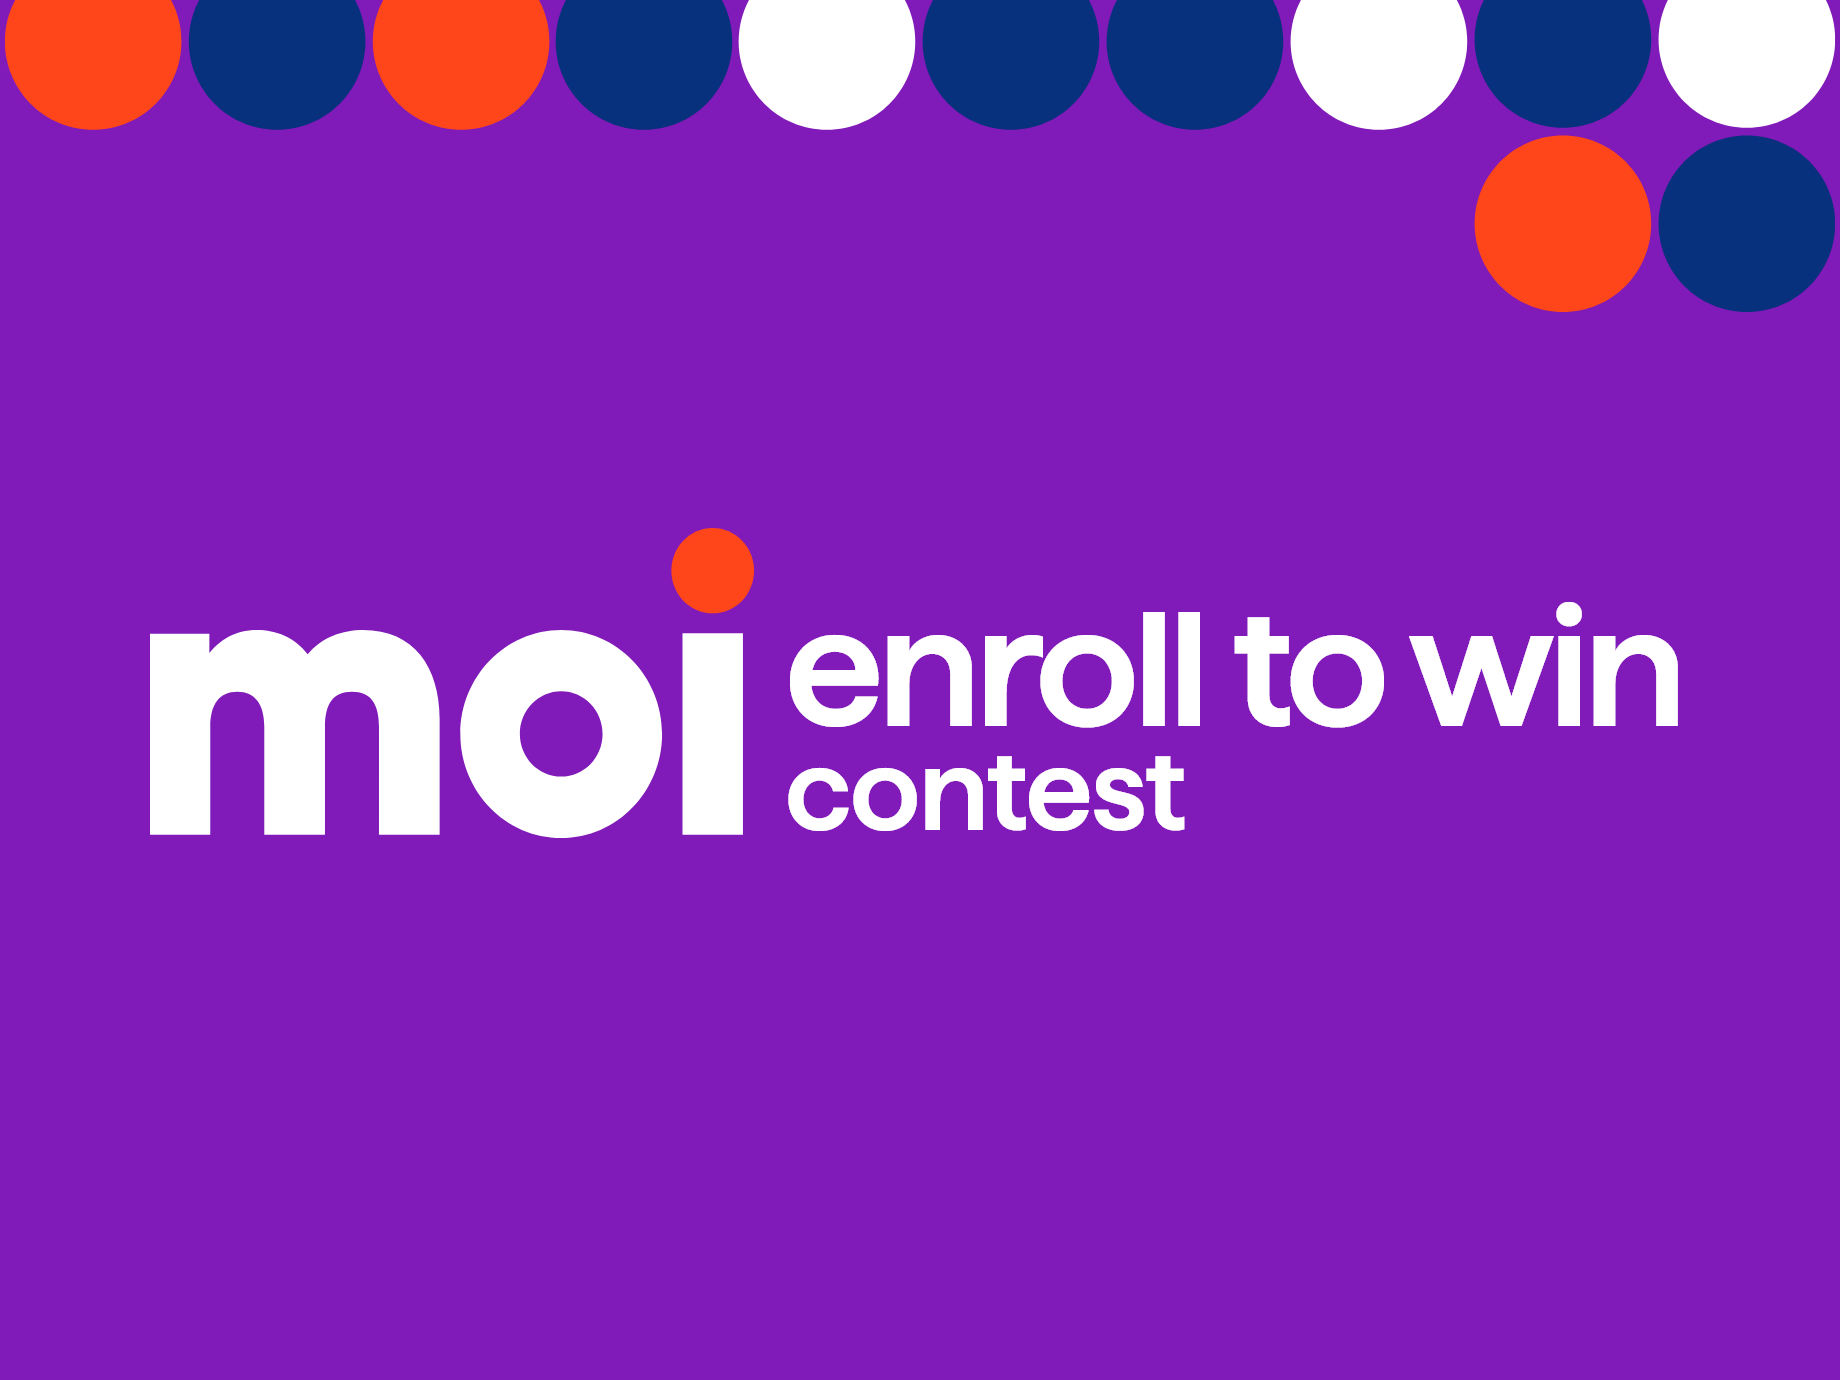 enroll to win